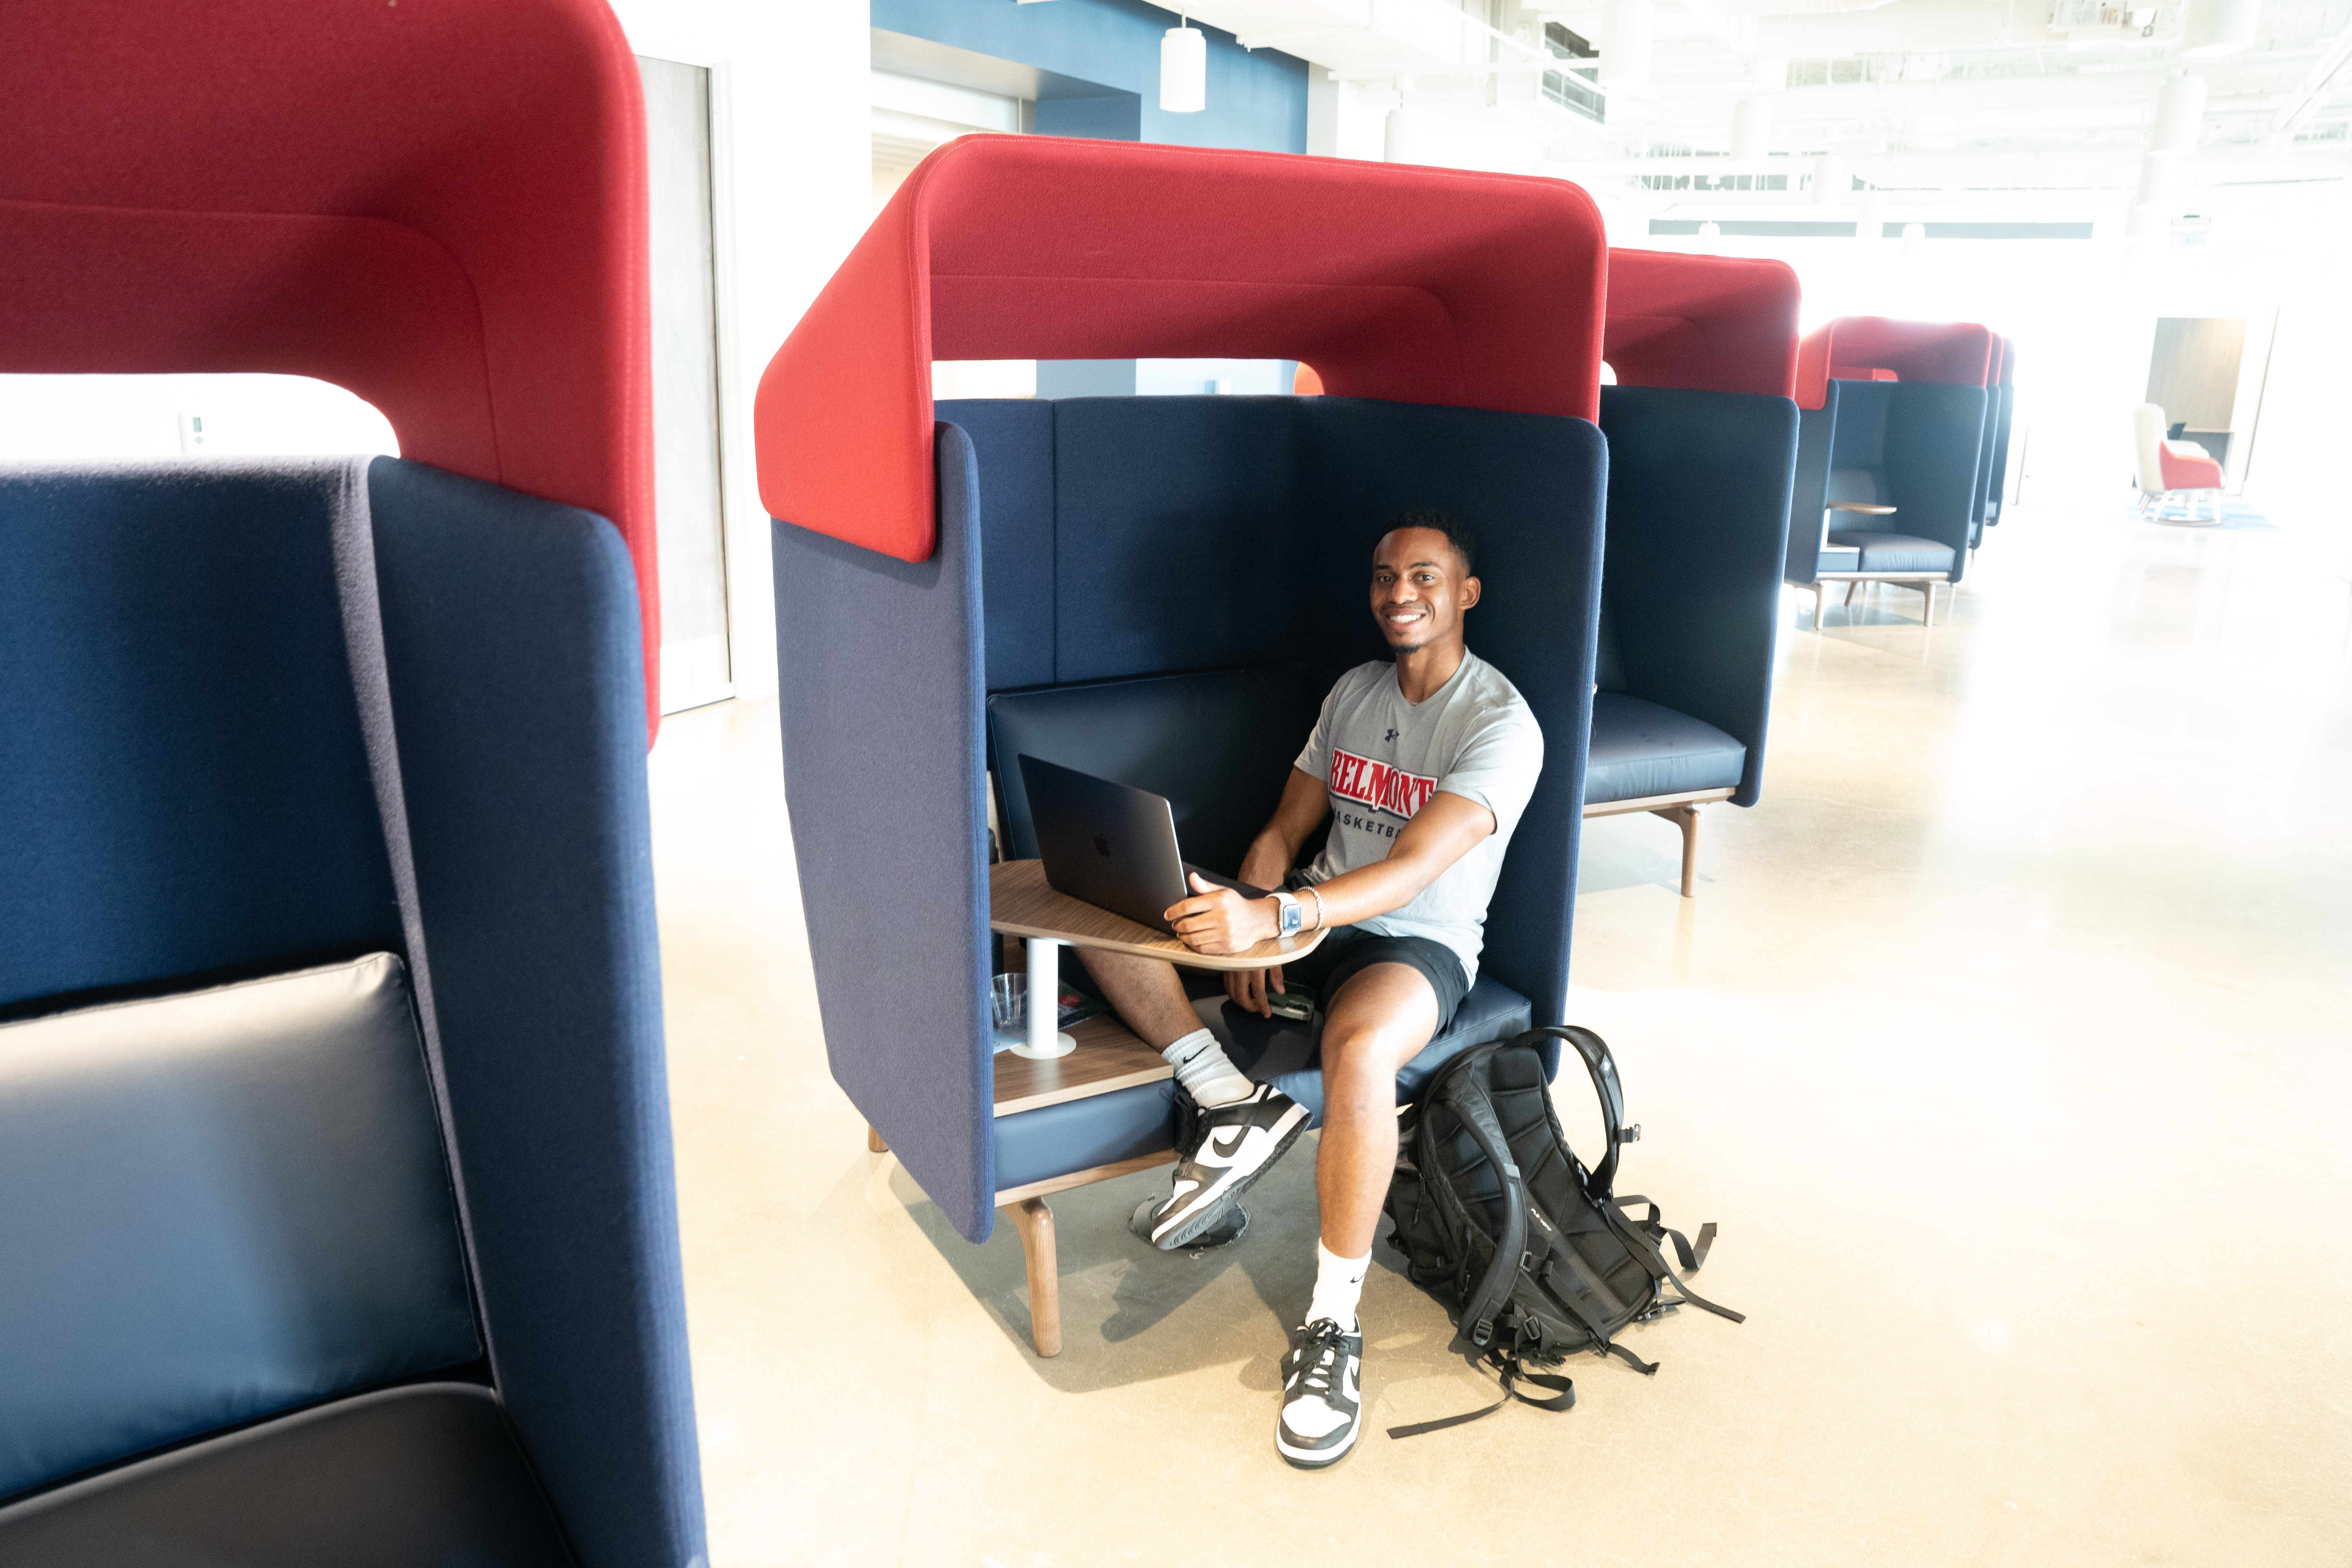 Student in study cubical in Massey Center